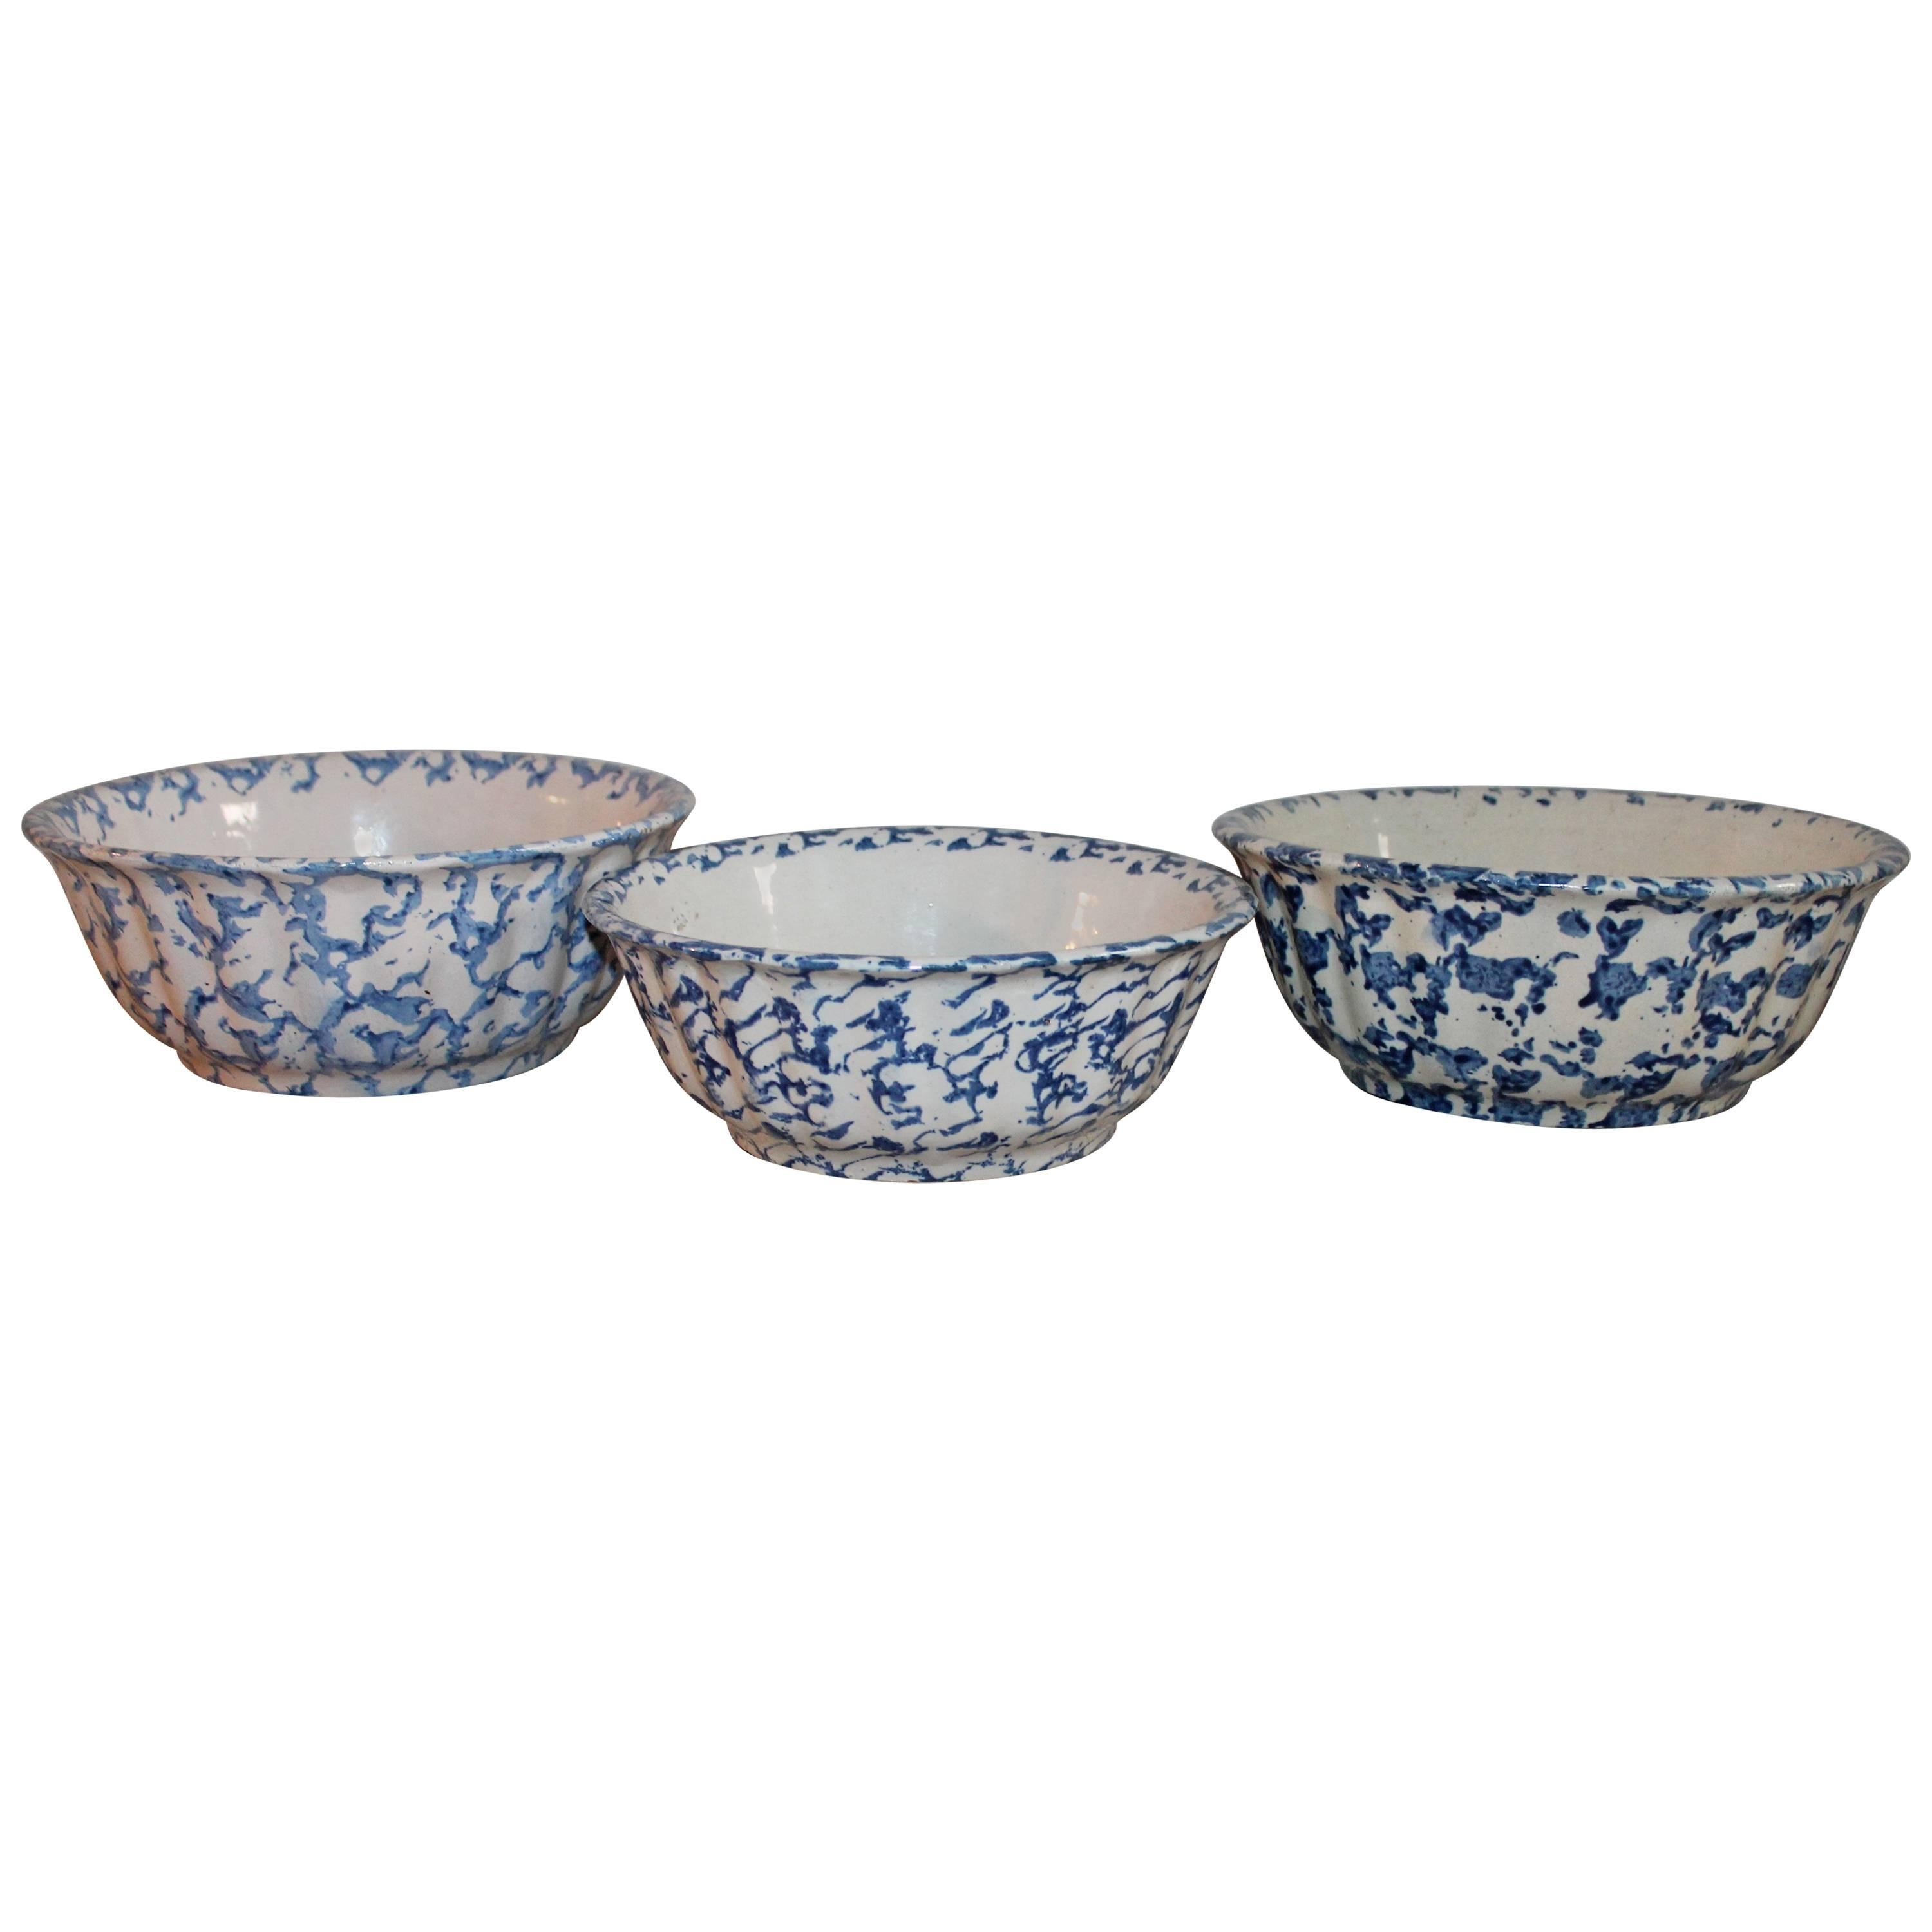 Three 19th Century Sponge Ware Pottery Scalloped Bowls For Sale